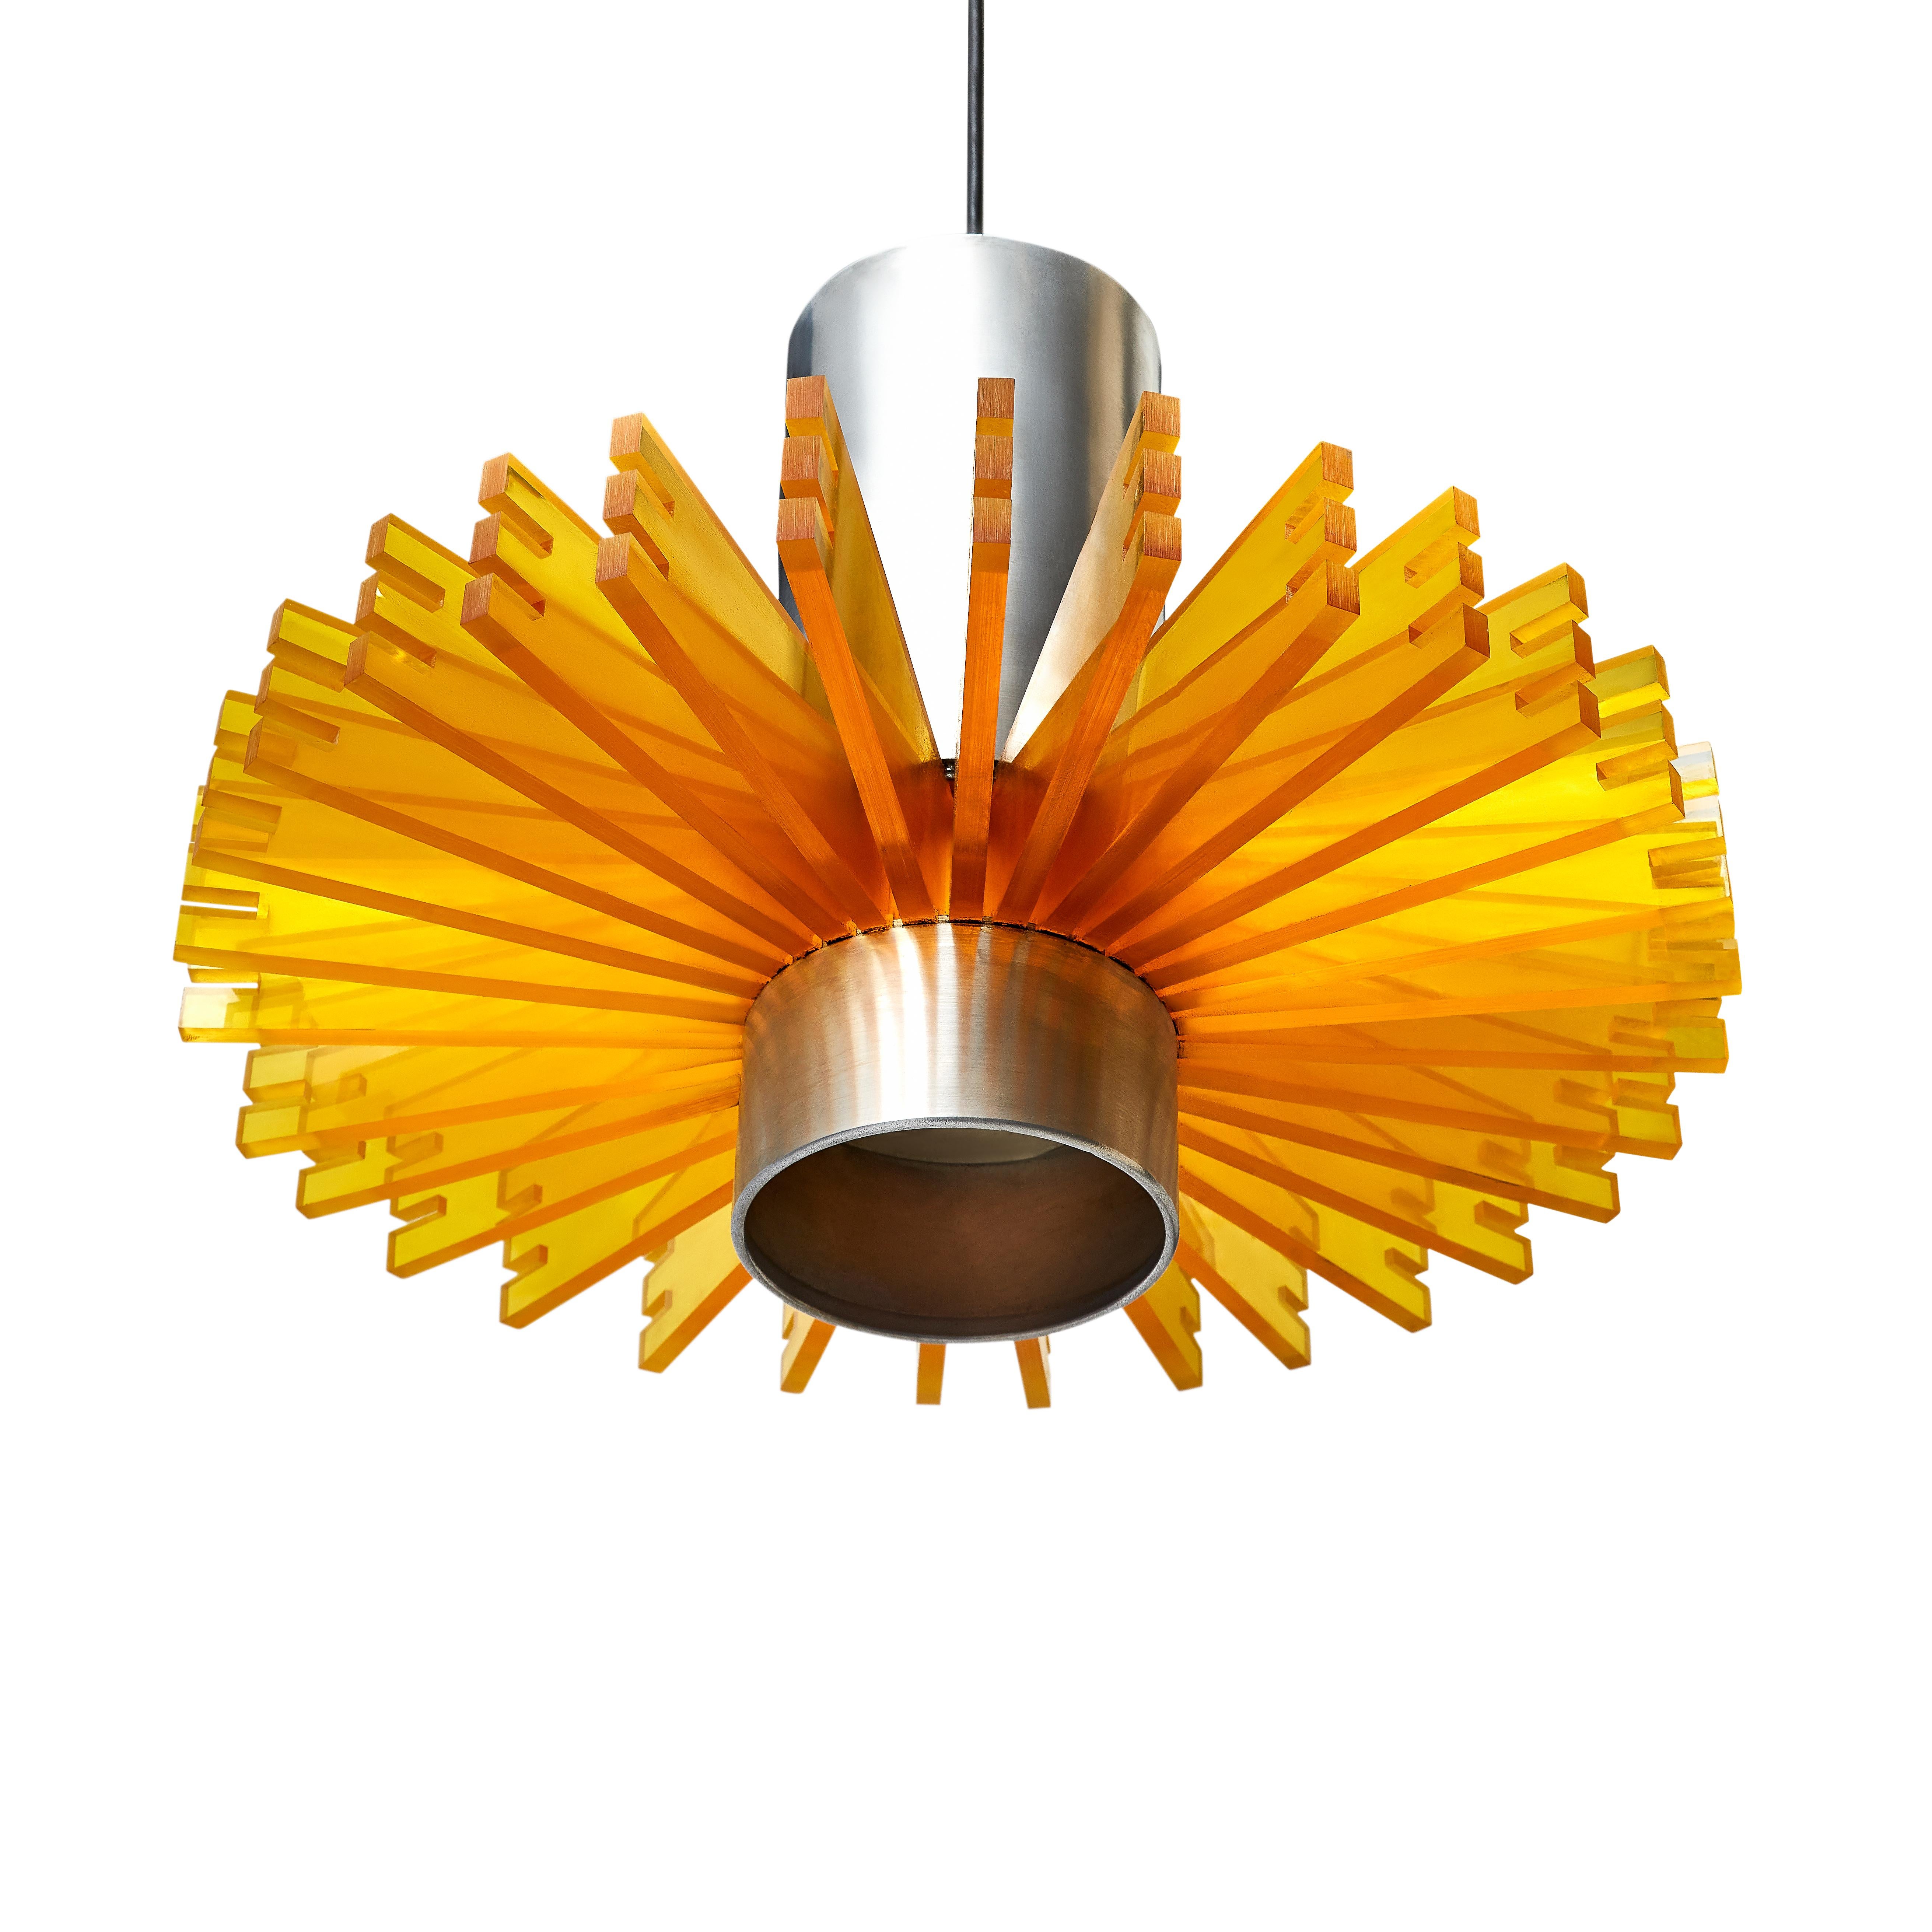 Belgian Mid-Century Modern Brushed Steel and Acrylic Pendant Lamp For Sale